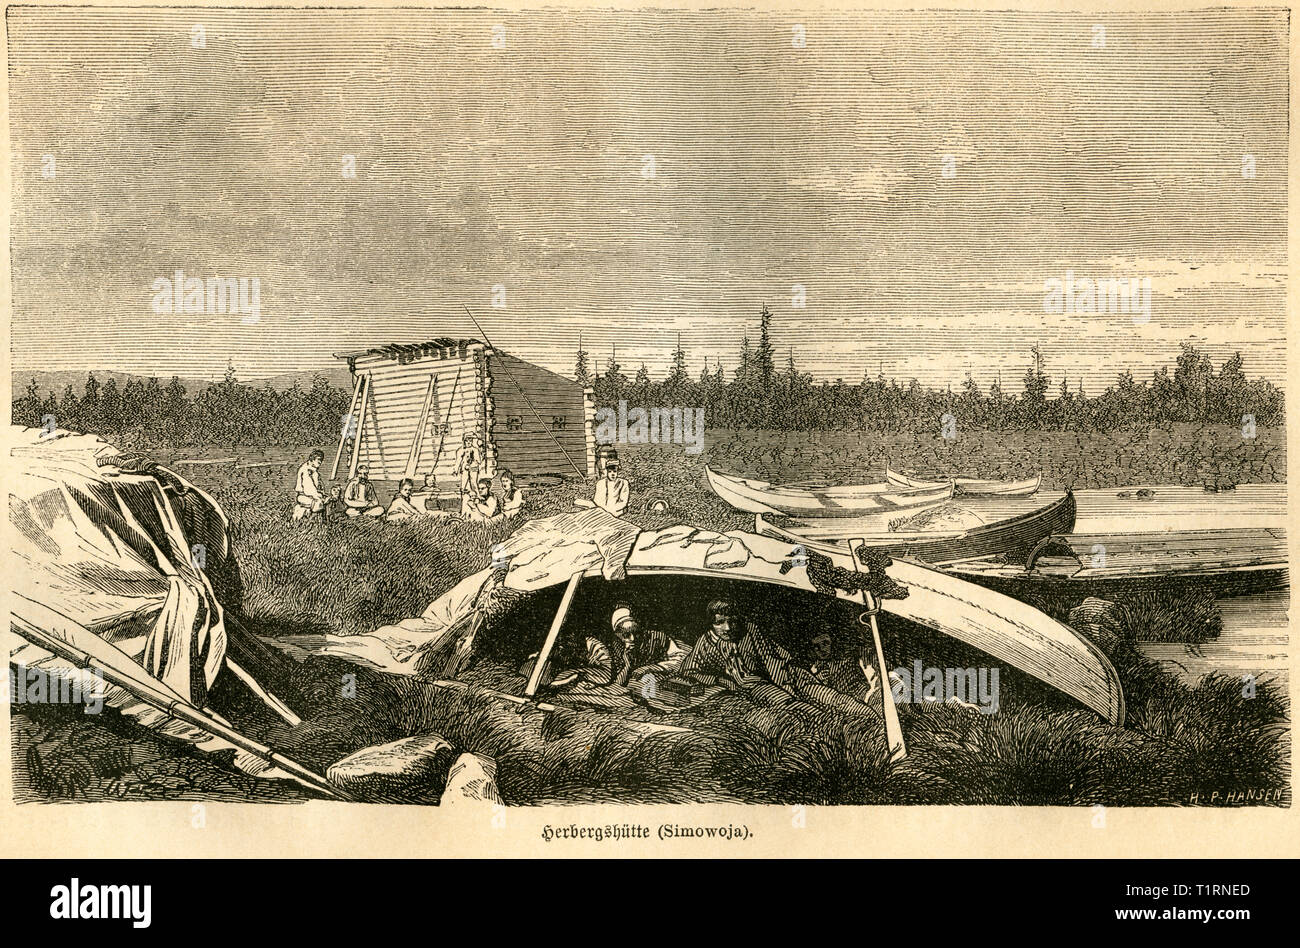 Russia,  Northwestern, Arkhangelsk Oblast?, block hut, image from: 'Das heutige Russland' (Russia today), published by H.v. Lankenau and L.v.d. Oelsnitz, publishing house Otto Spamer, Leipzig, 1876. , Additional-Rights-Clearance-Info-Not-Available Stock Photo